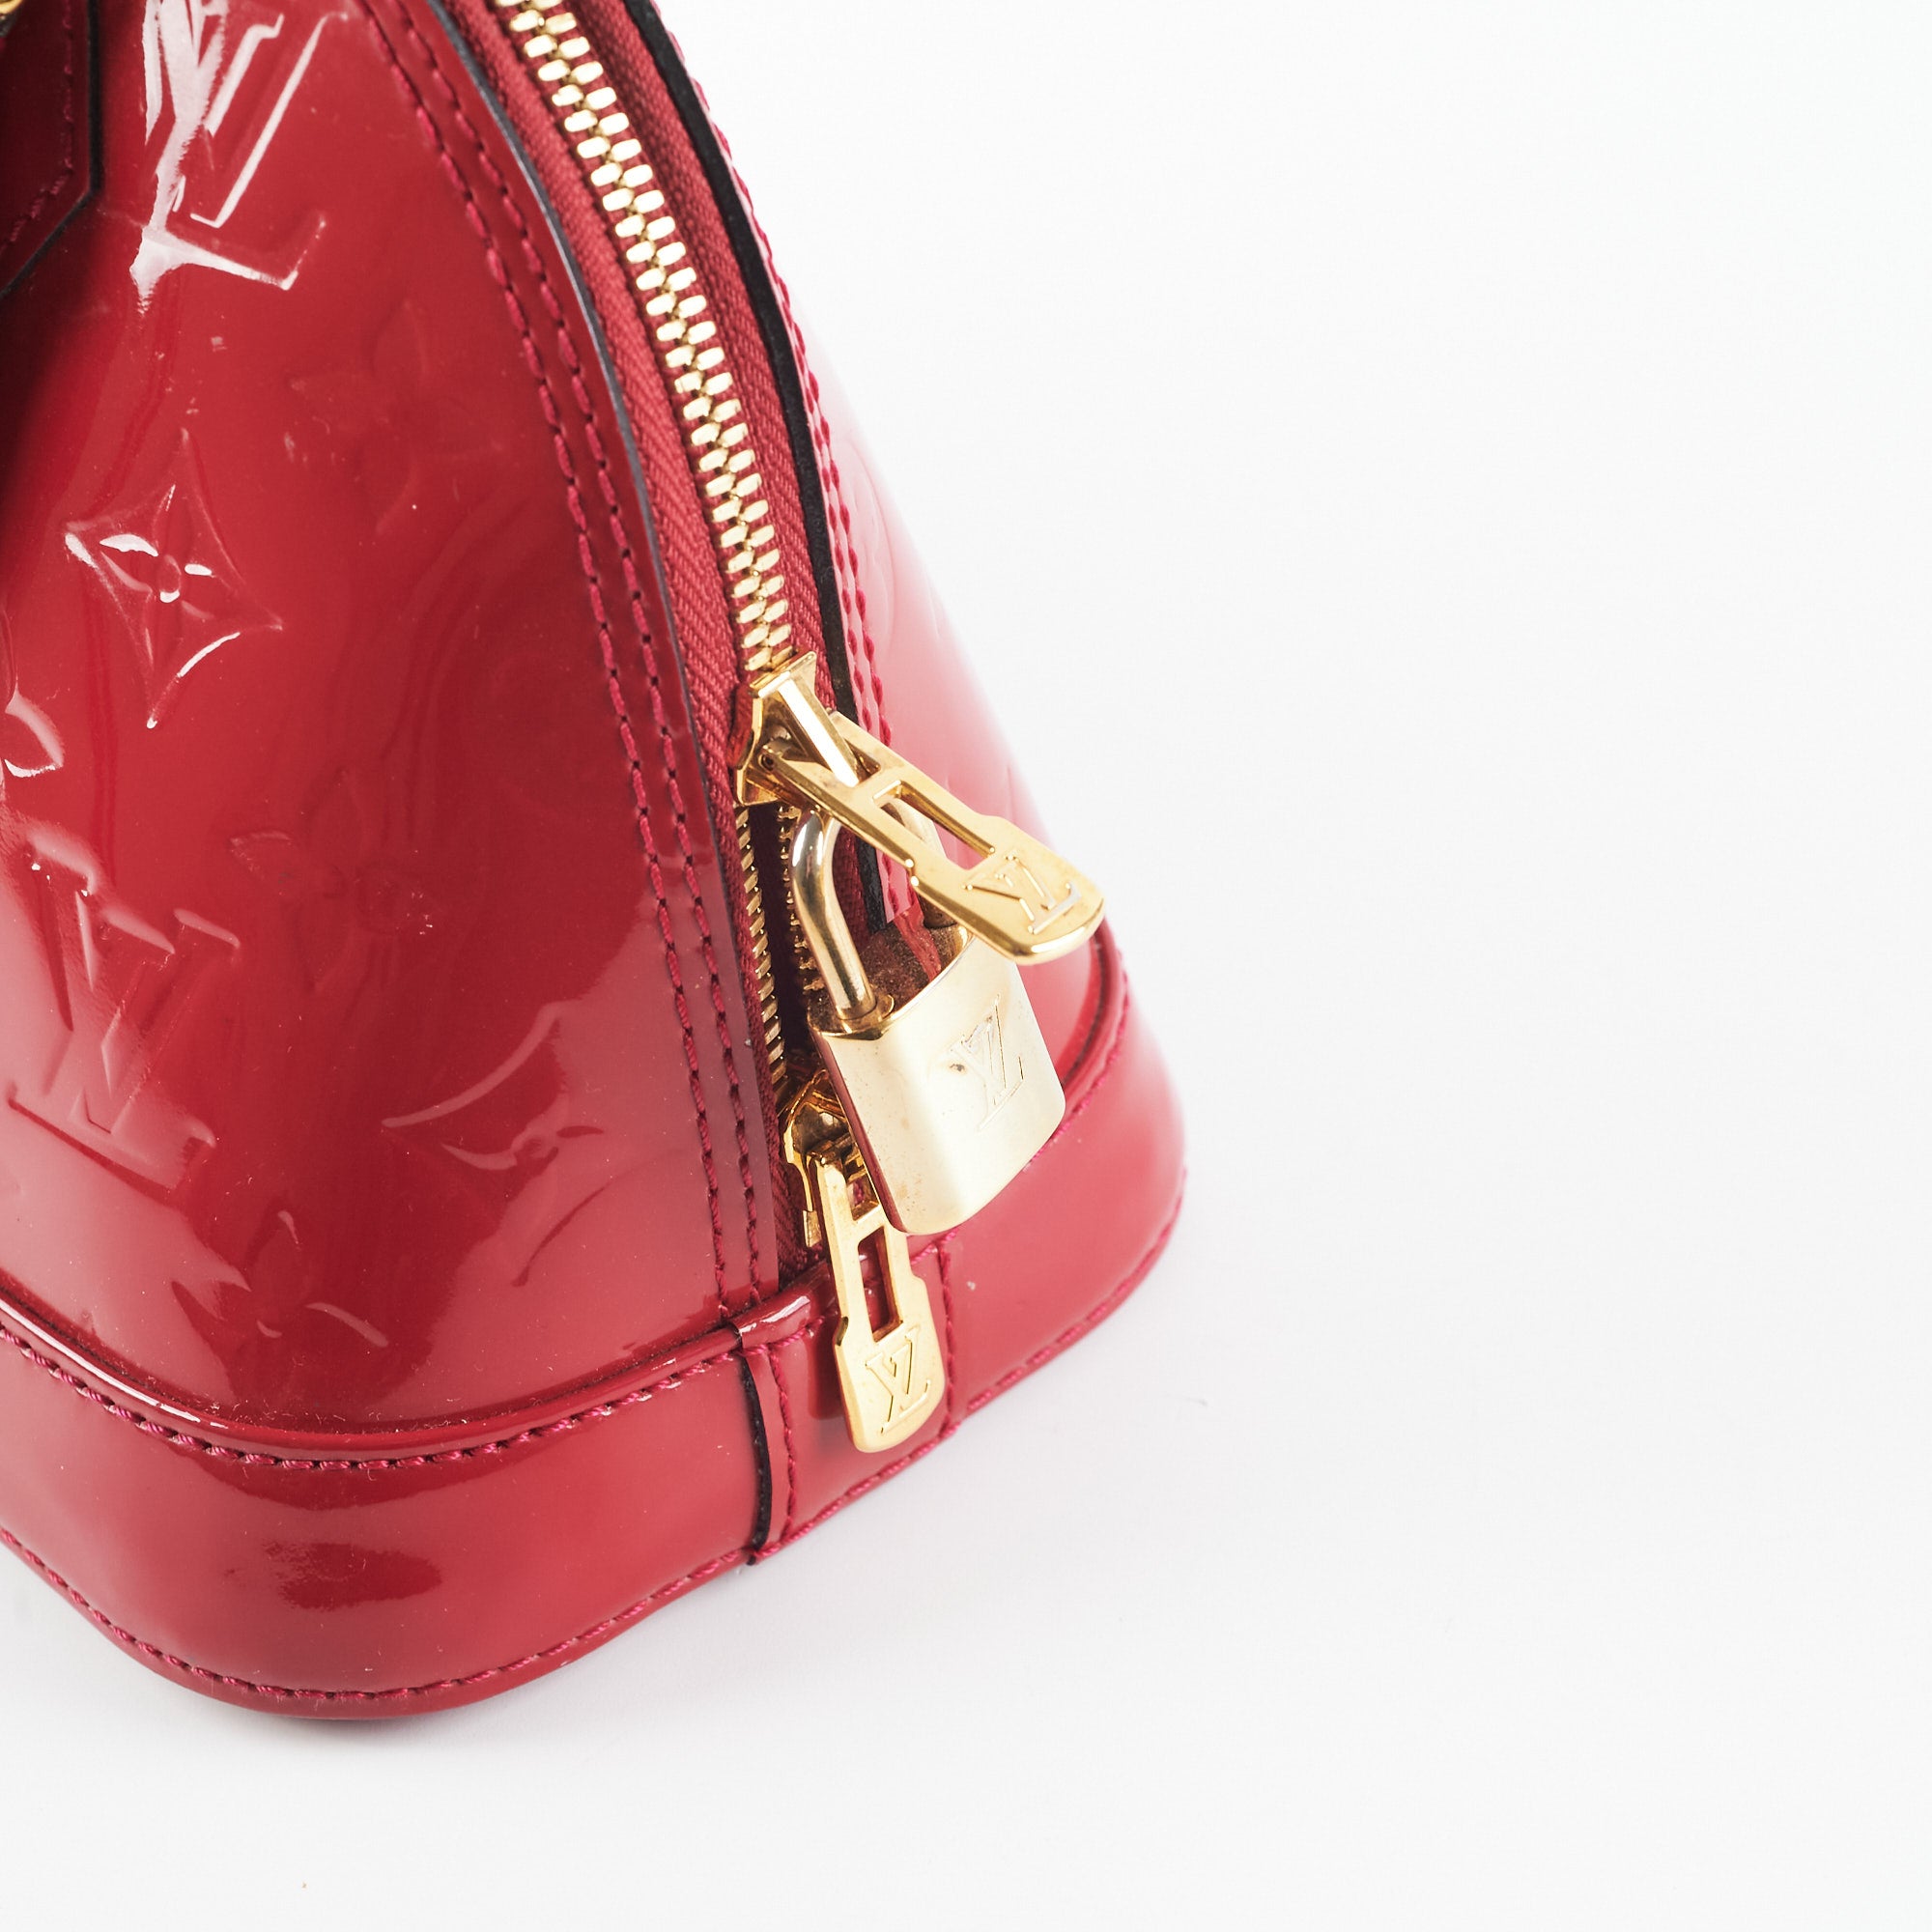 Louis Vuitton Alma Bb Patent Leather Dome Bag in Red